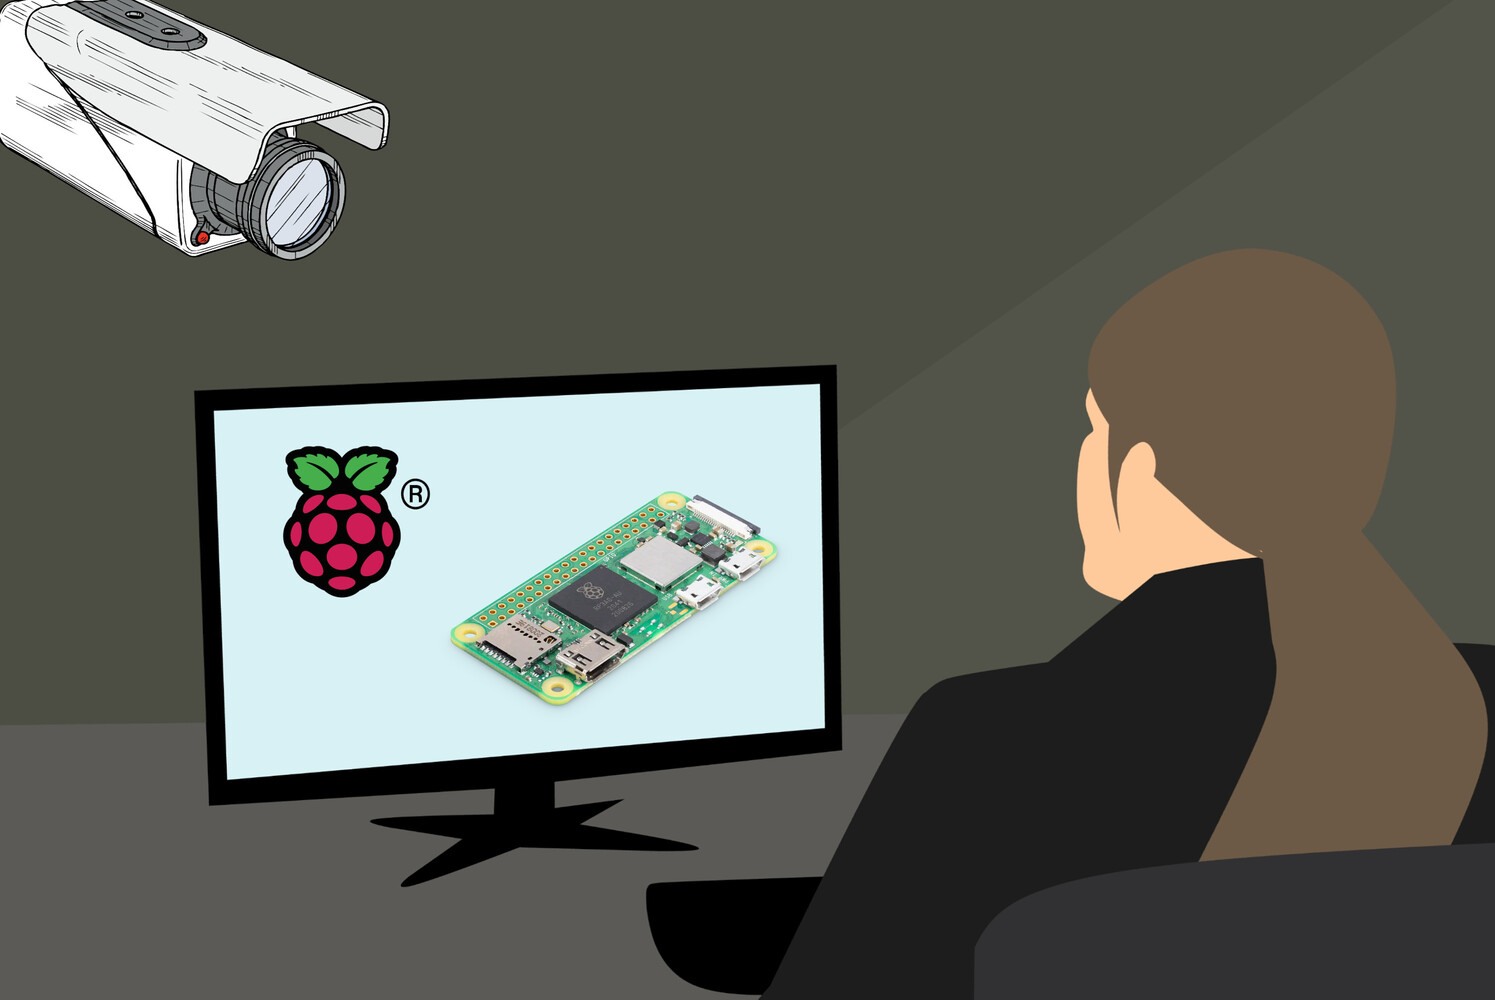 A person looking at a monitor with the Raspberry Pi logo and a Raspberry Pi Zero 2 W device in it. There is a camera in the top left pointed at the person.